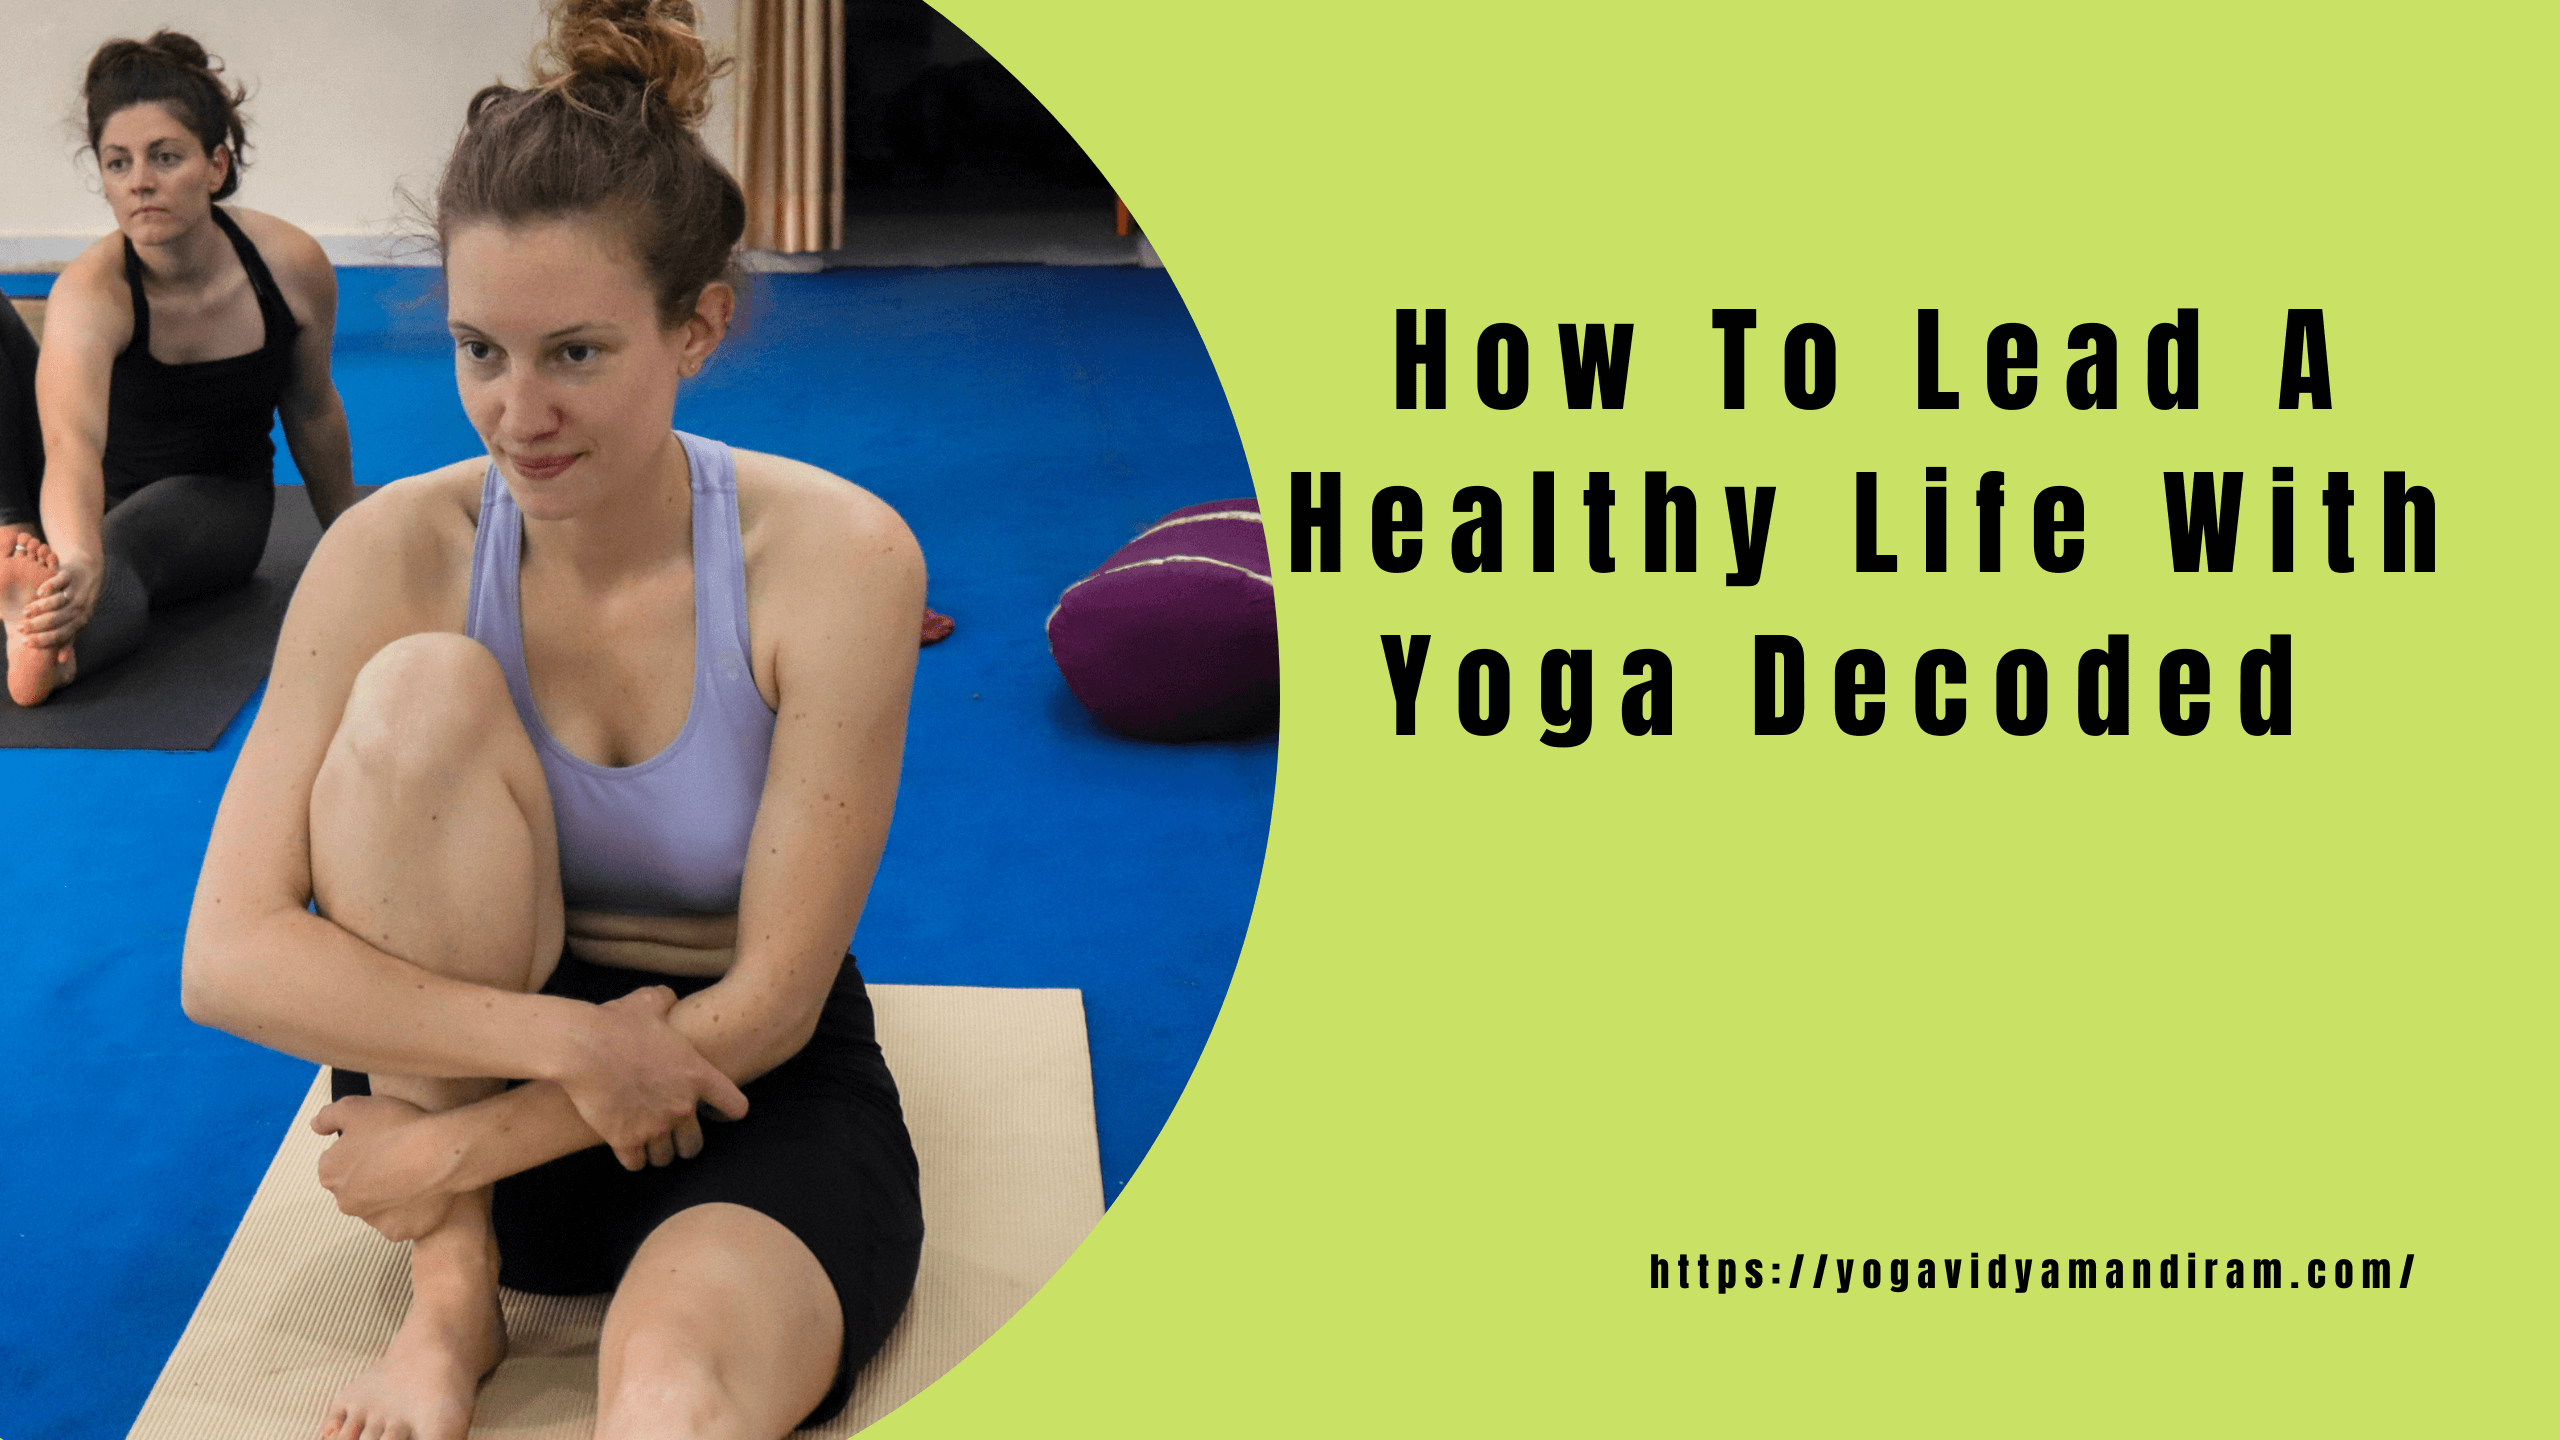 How To Lead A Healthy Life With Yoga Decoded